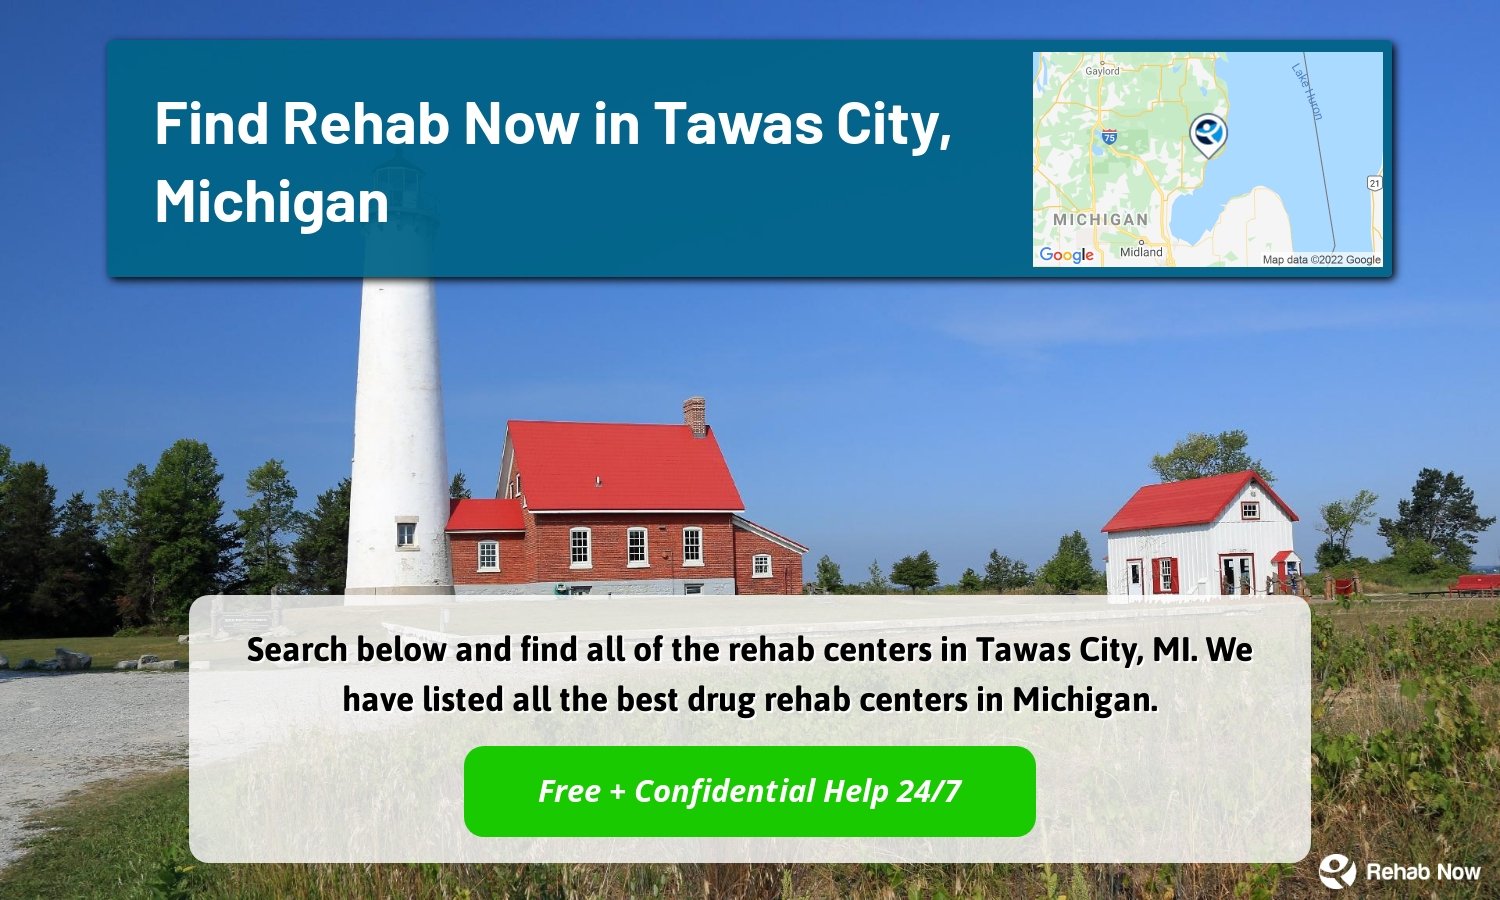 Search below and find all of the rehab centers in Tawas City, MI. We have listed all the best drug rehab centers in Michigan.